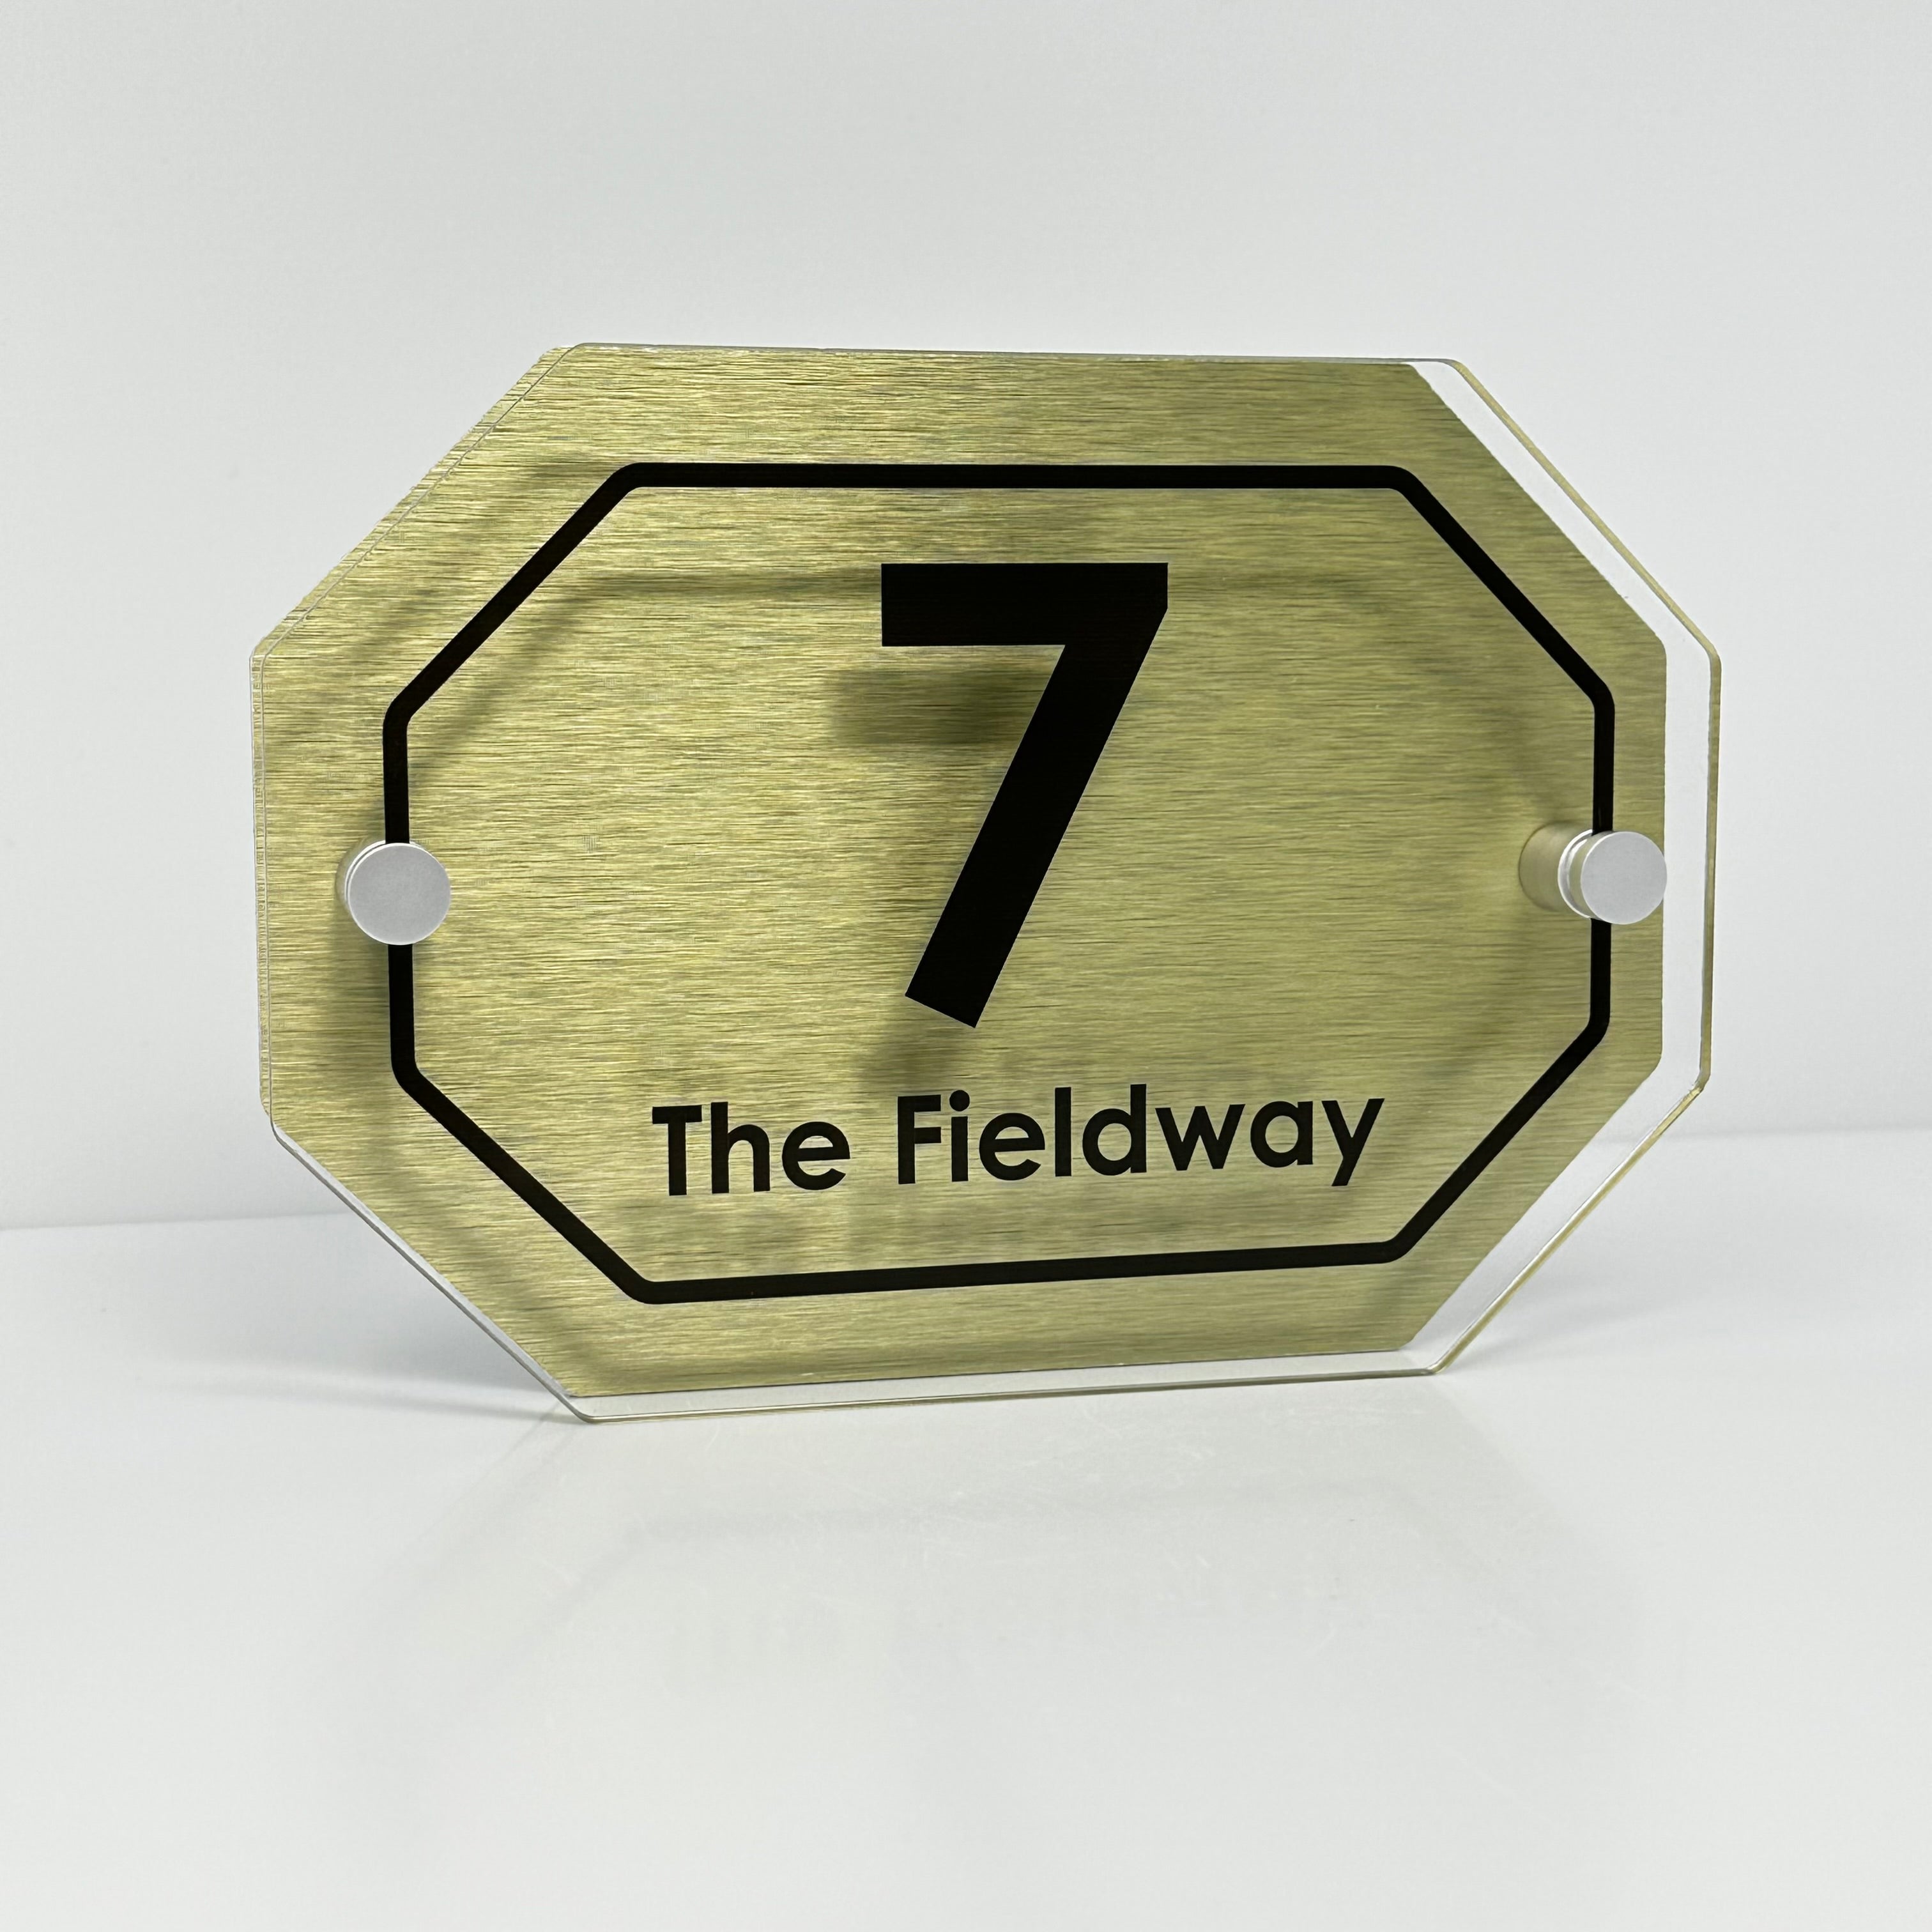 The Fieldway Modern House Sign with Perspex Acrylic Front, Gold Rear Panel and Satin Silver Stand Off Fixings ( Size - 20cm x 14cm )